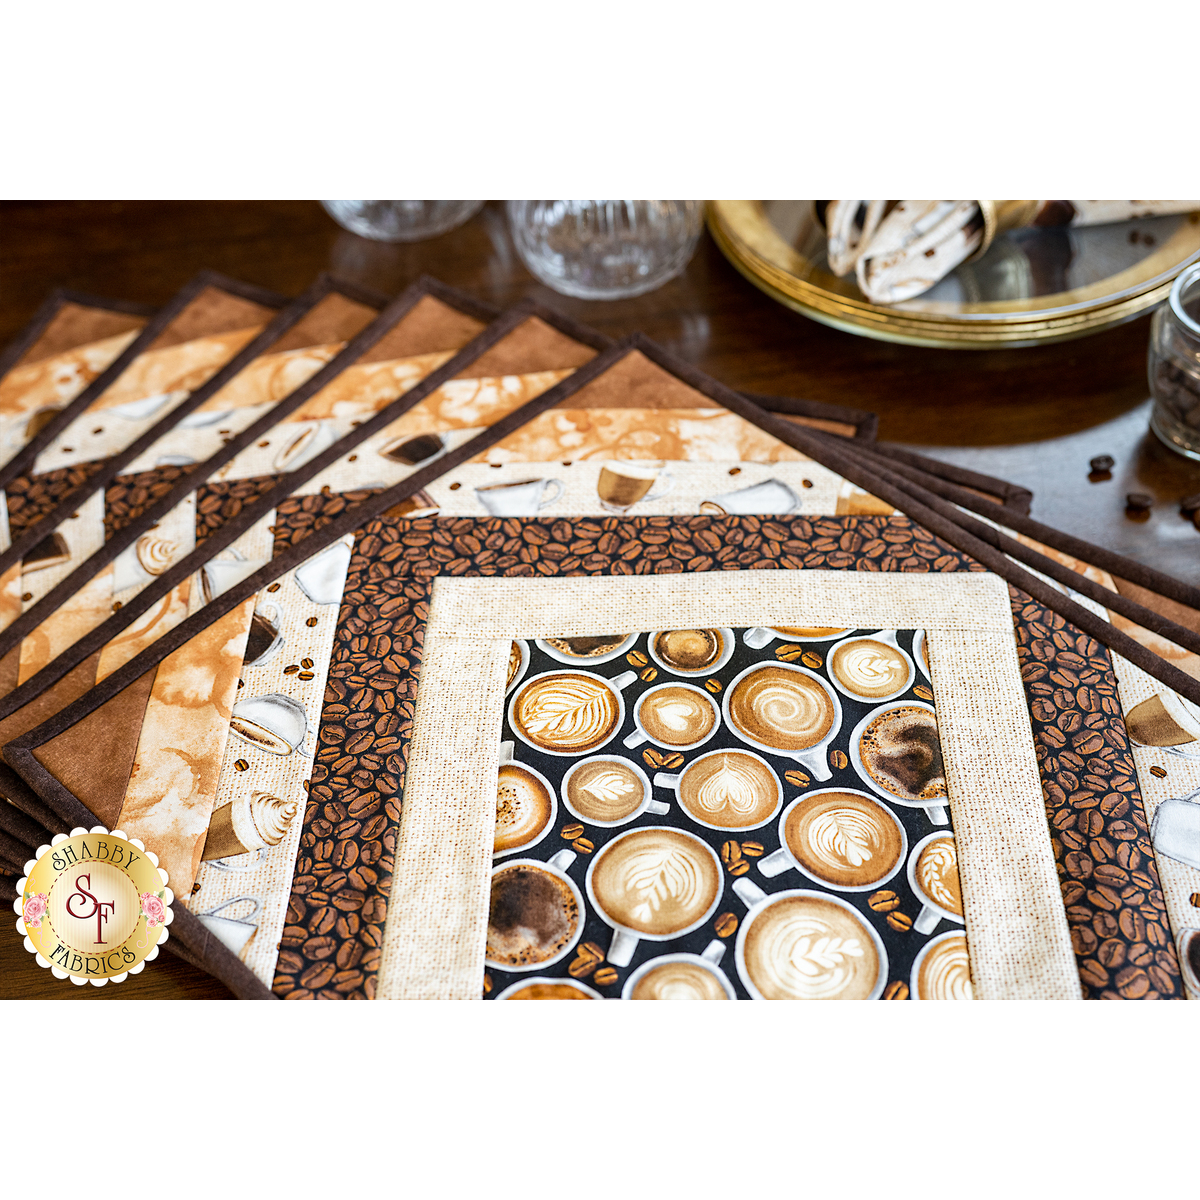 Quilt As You Go - Casablanca Placemats Kit - Postcard Holiday